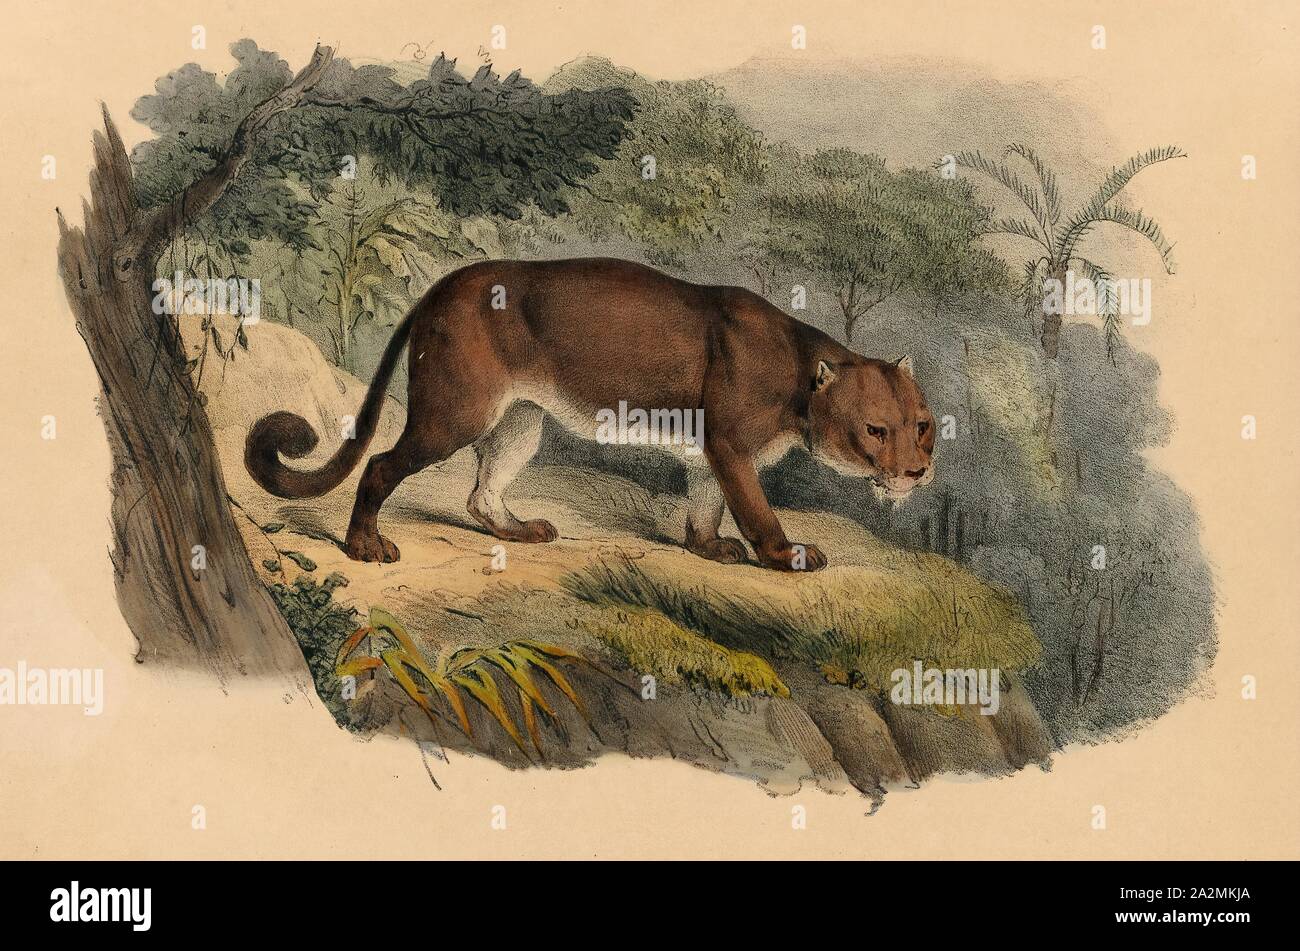 Felis concolor, Print, The cougar (Puma concolor), also commonly known by other  names including mountain lion, panther, puma, and catamount, is a large  felid of the subfamily Felinae native to the Americas.